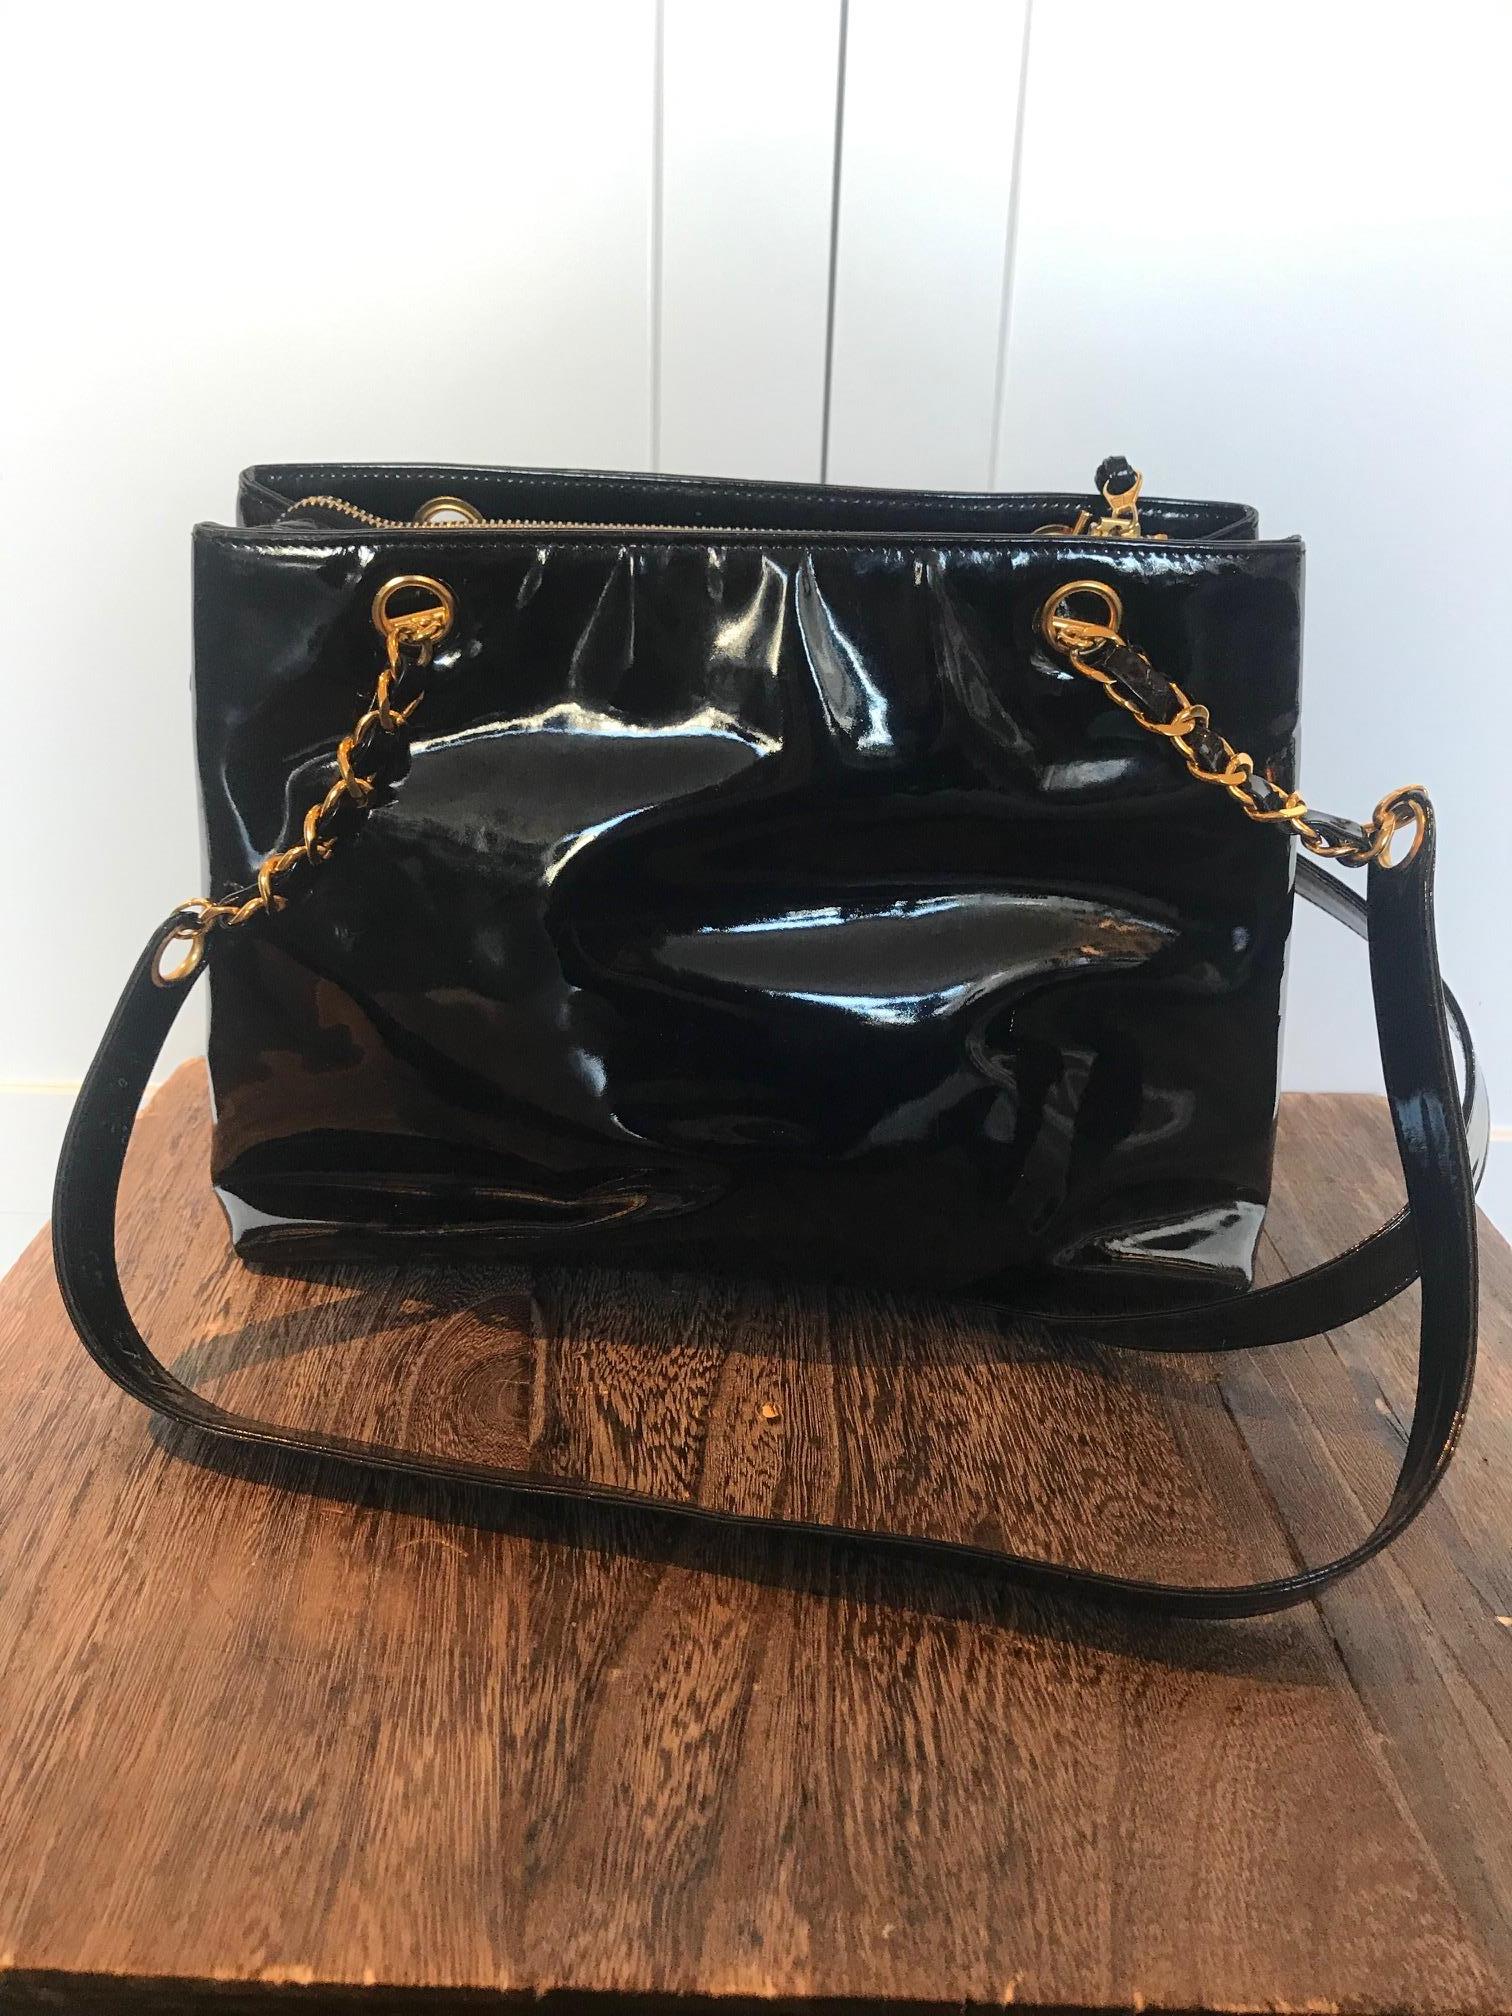 Chanel Front Pocket Tote In Good Condition For Sale In Roslyn, NY